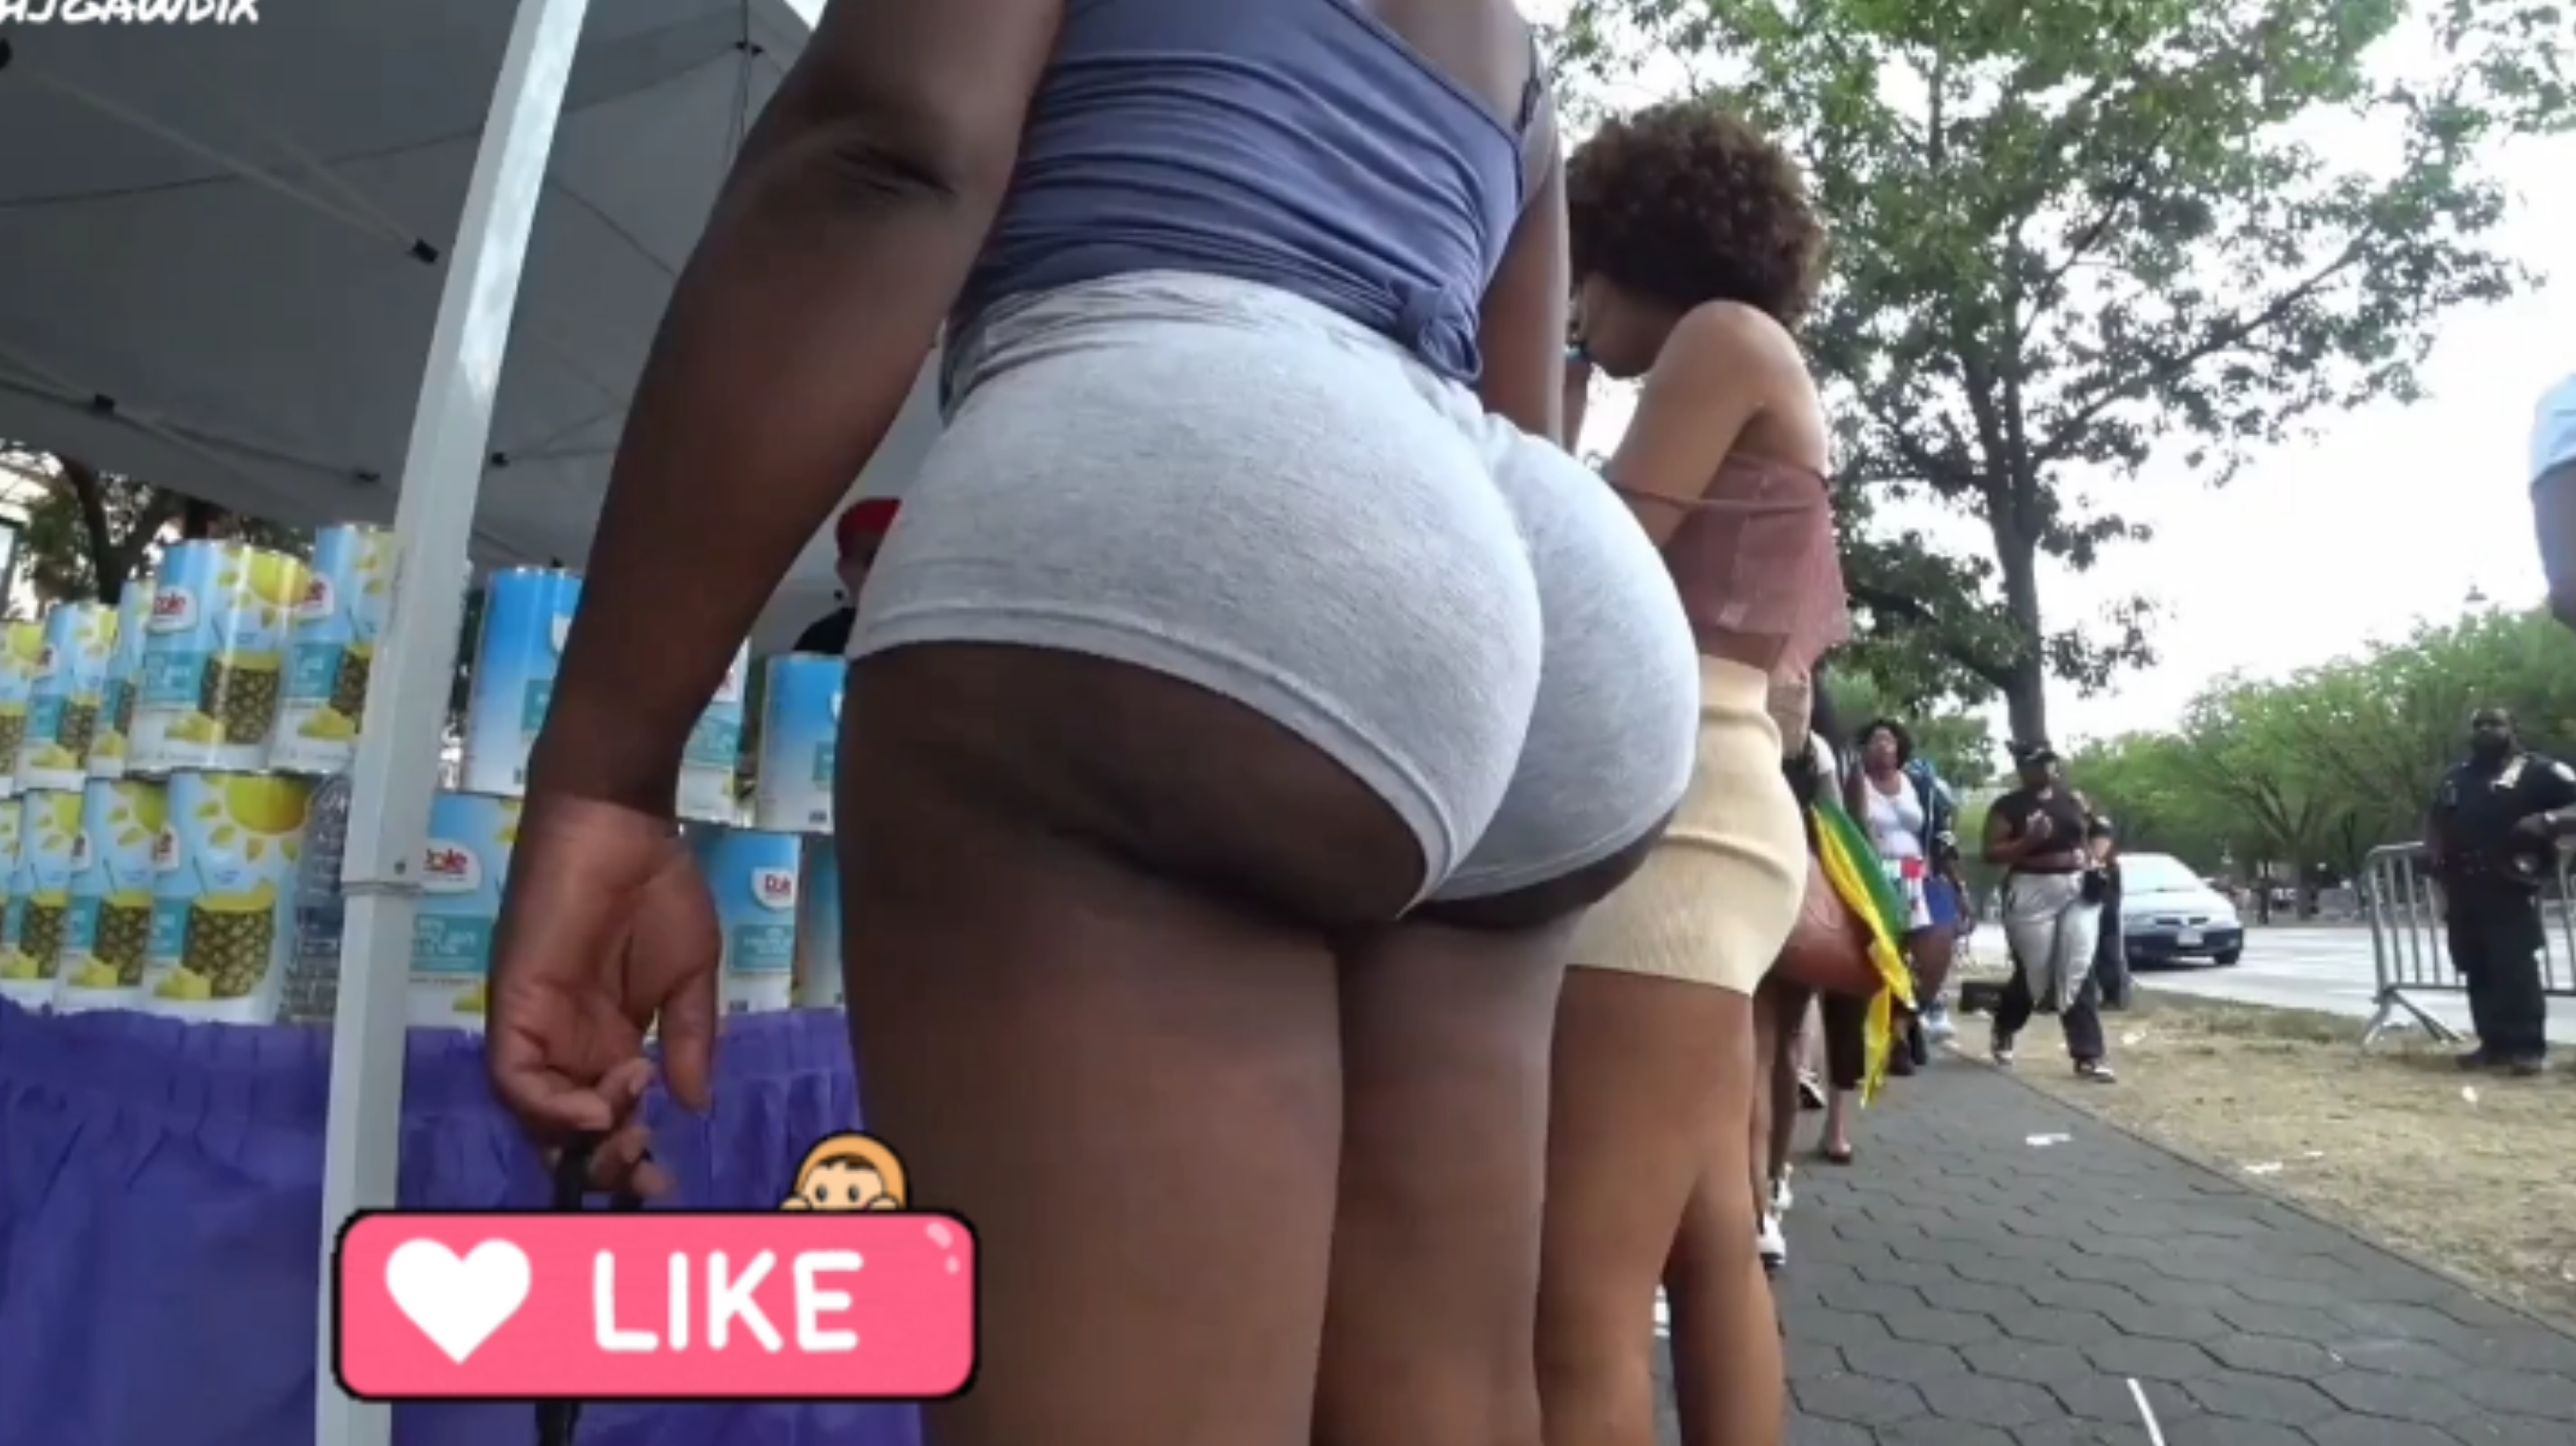 SHAPELY BODACIOUS JIGGLY BUBBLE BUTT CANDID